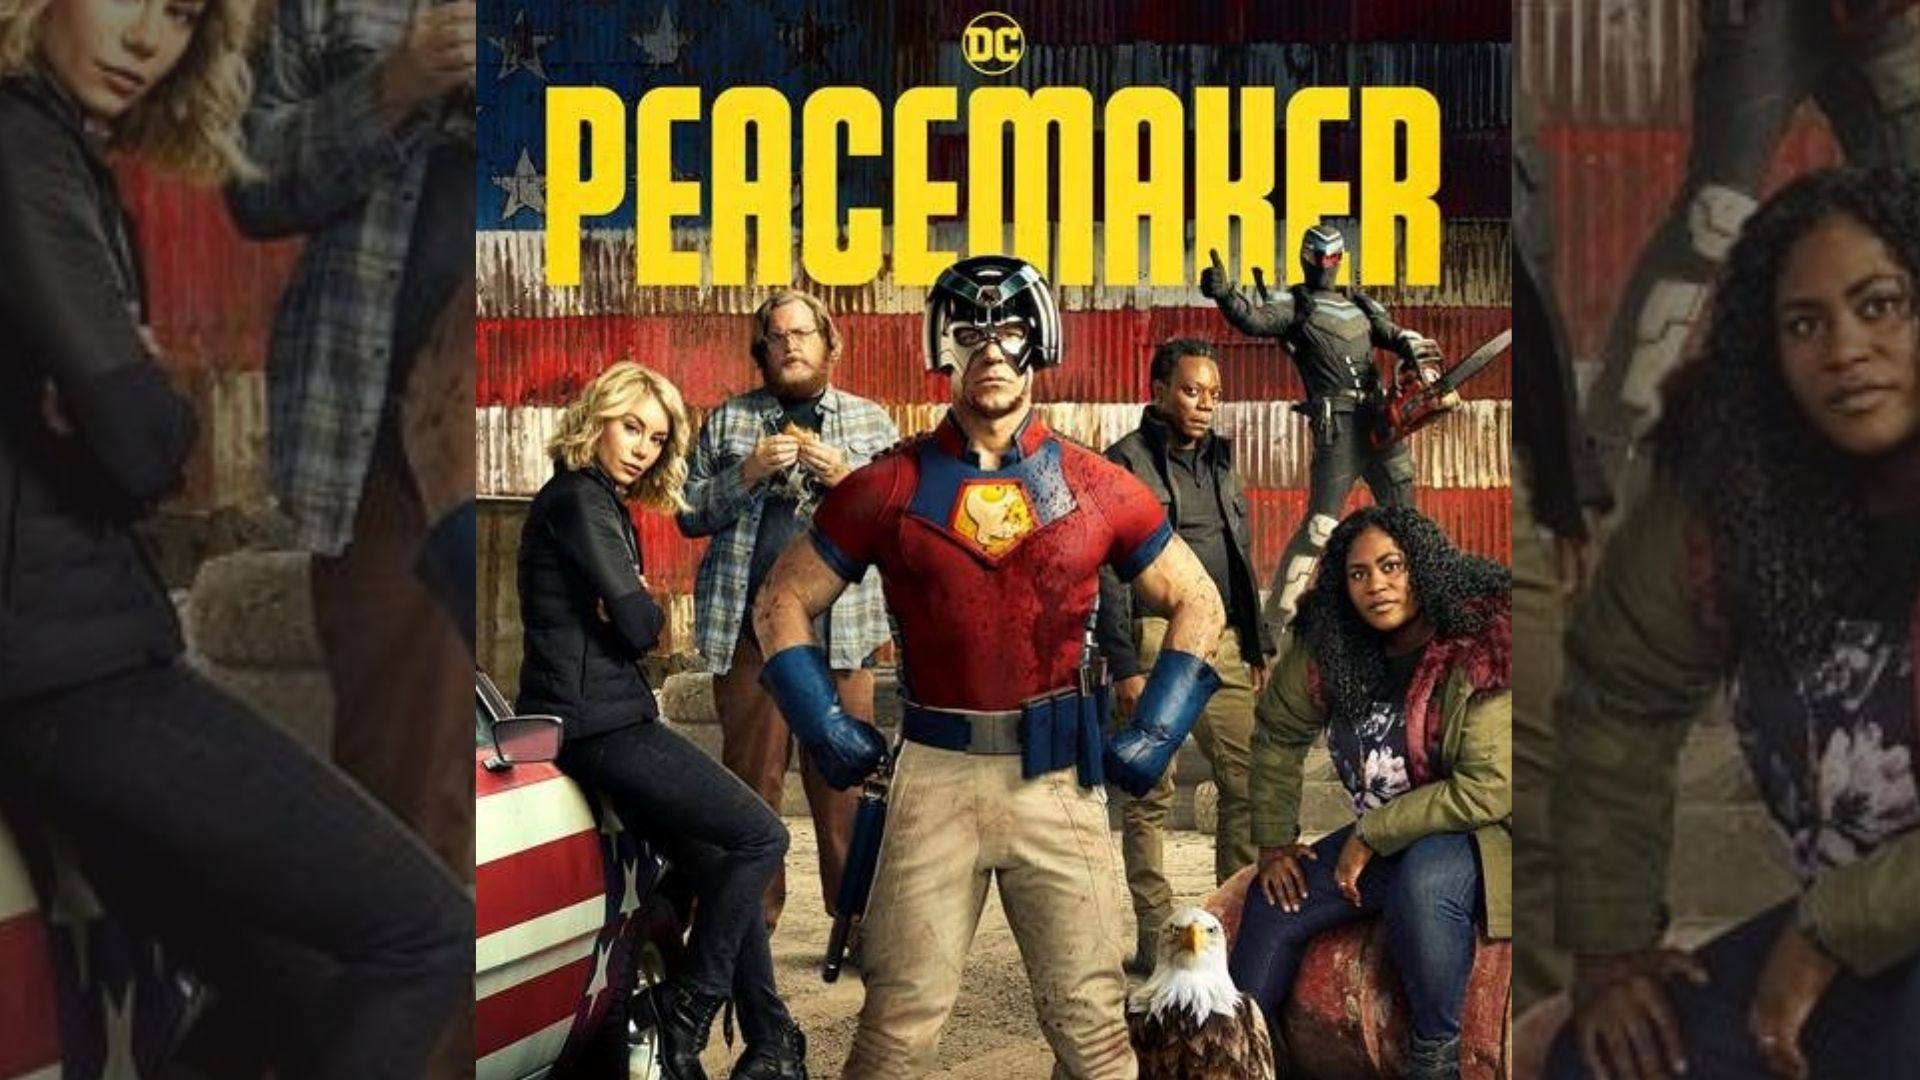 Peacemaker Trailer, Release date and other details